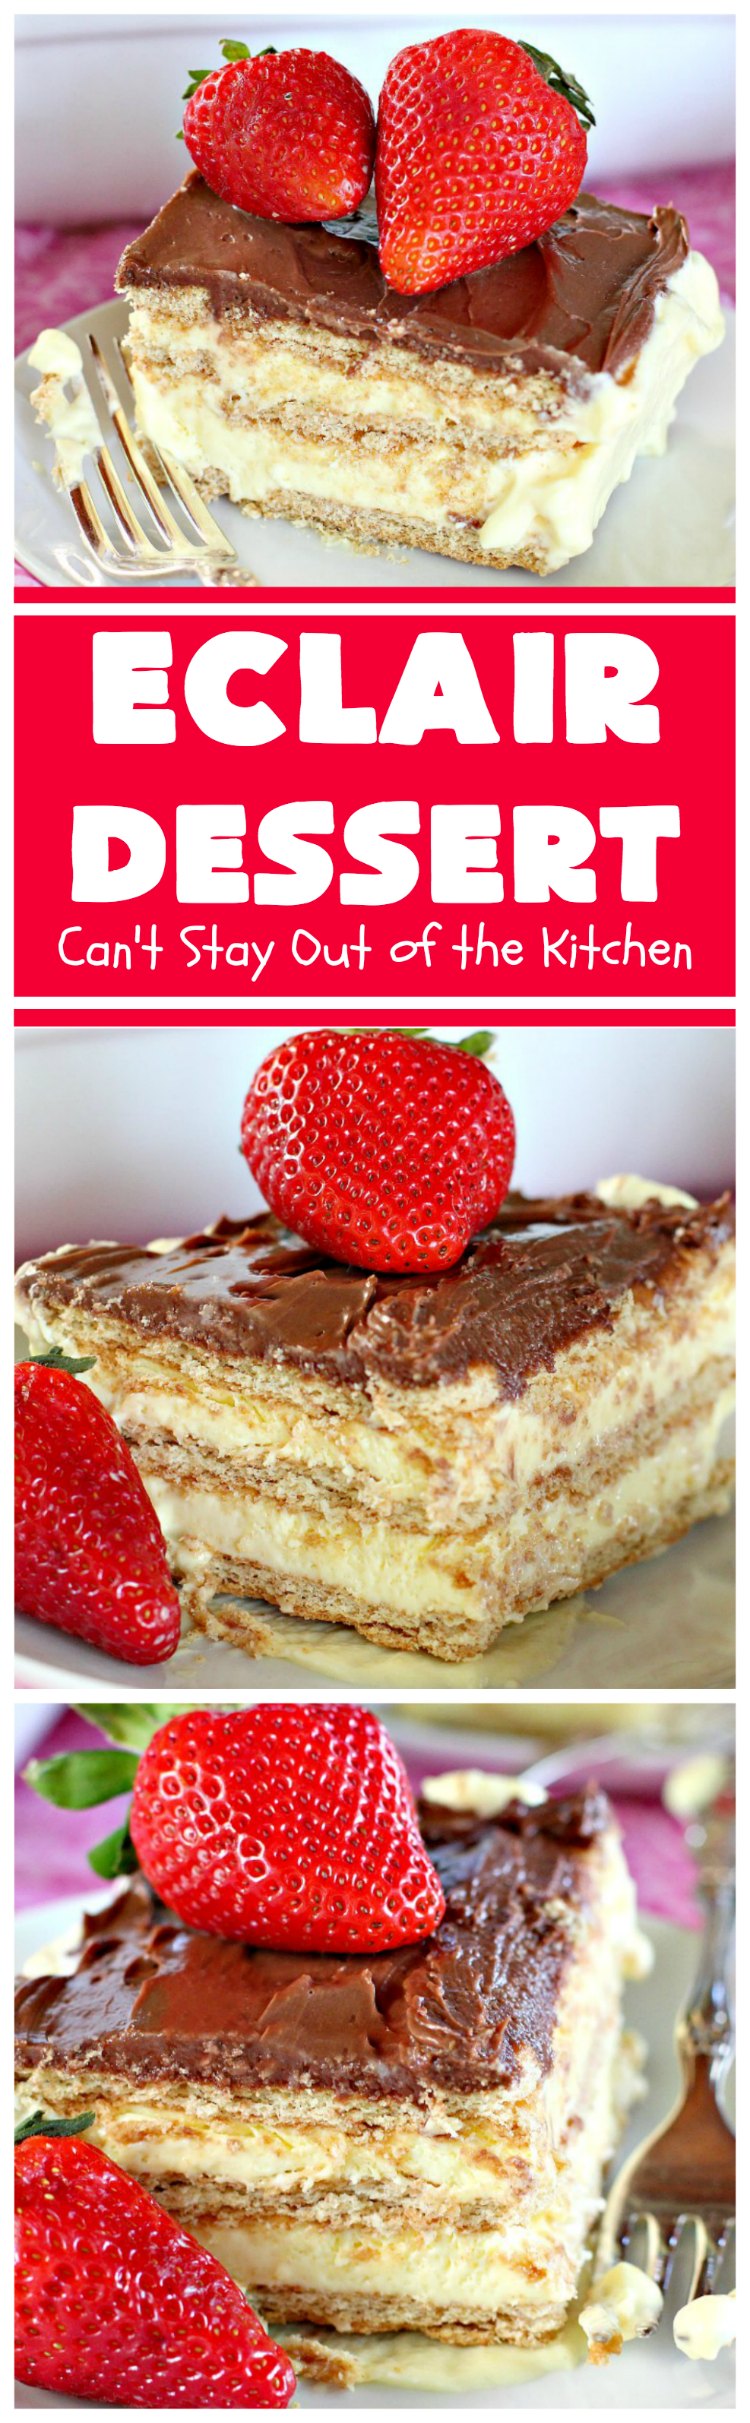 Eclair Dessert | Can't Stay Out of the Kitchen